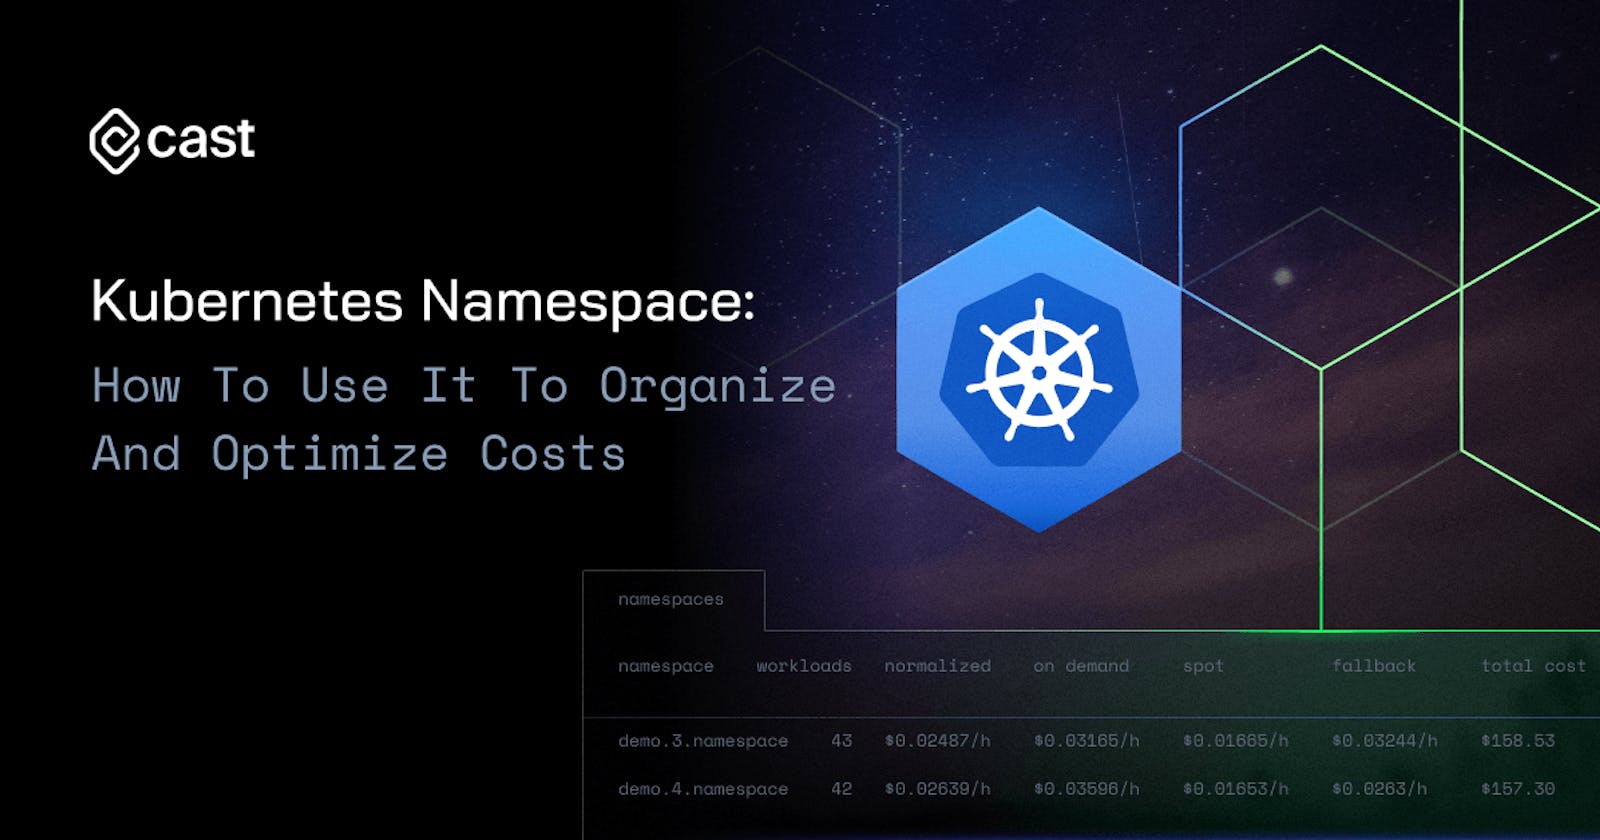 Kubernetes Namespace: How To Use It To Organize And Optimize Costs